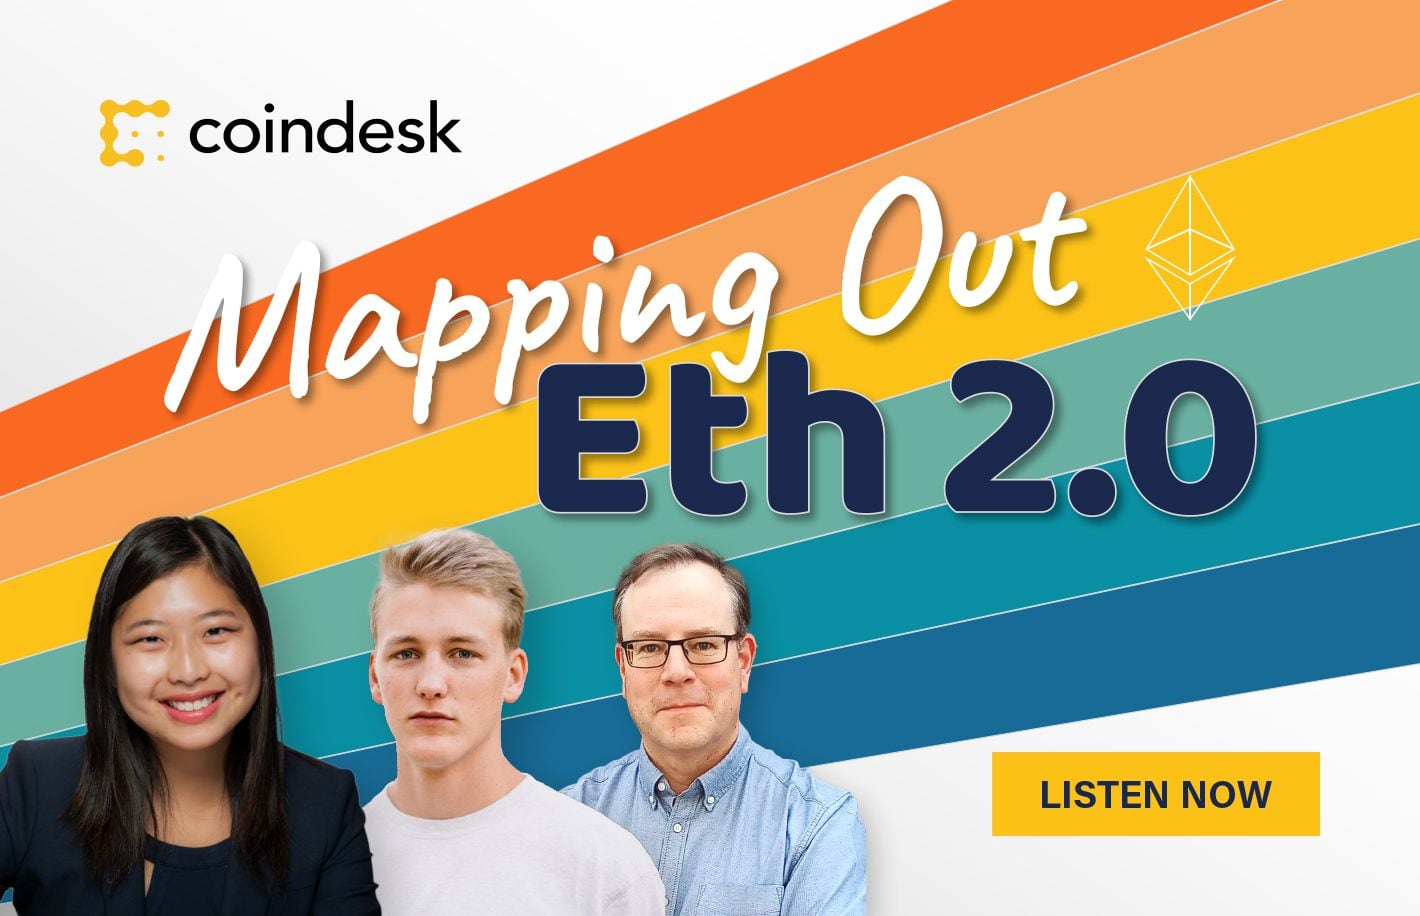 Mapping Out Eth 2.0